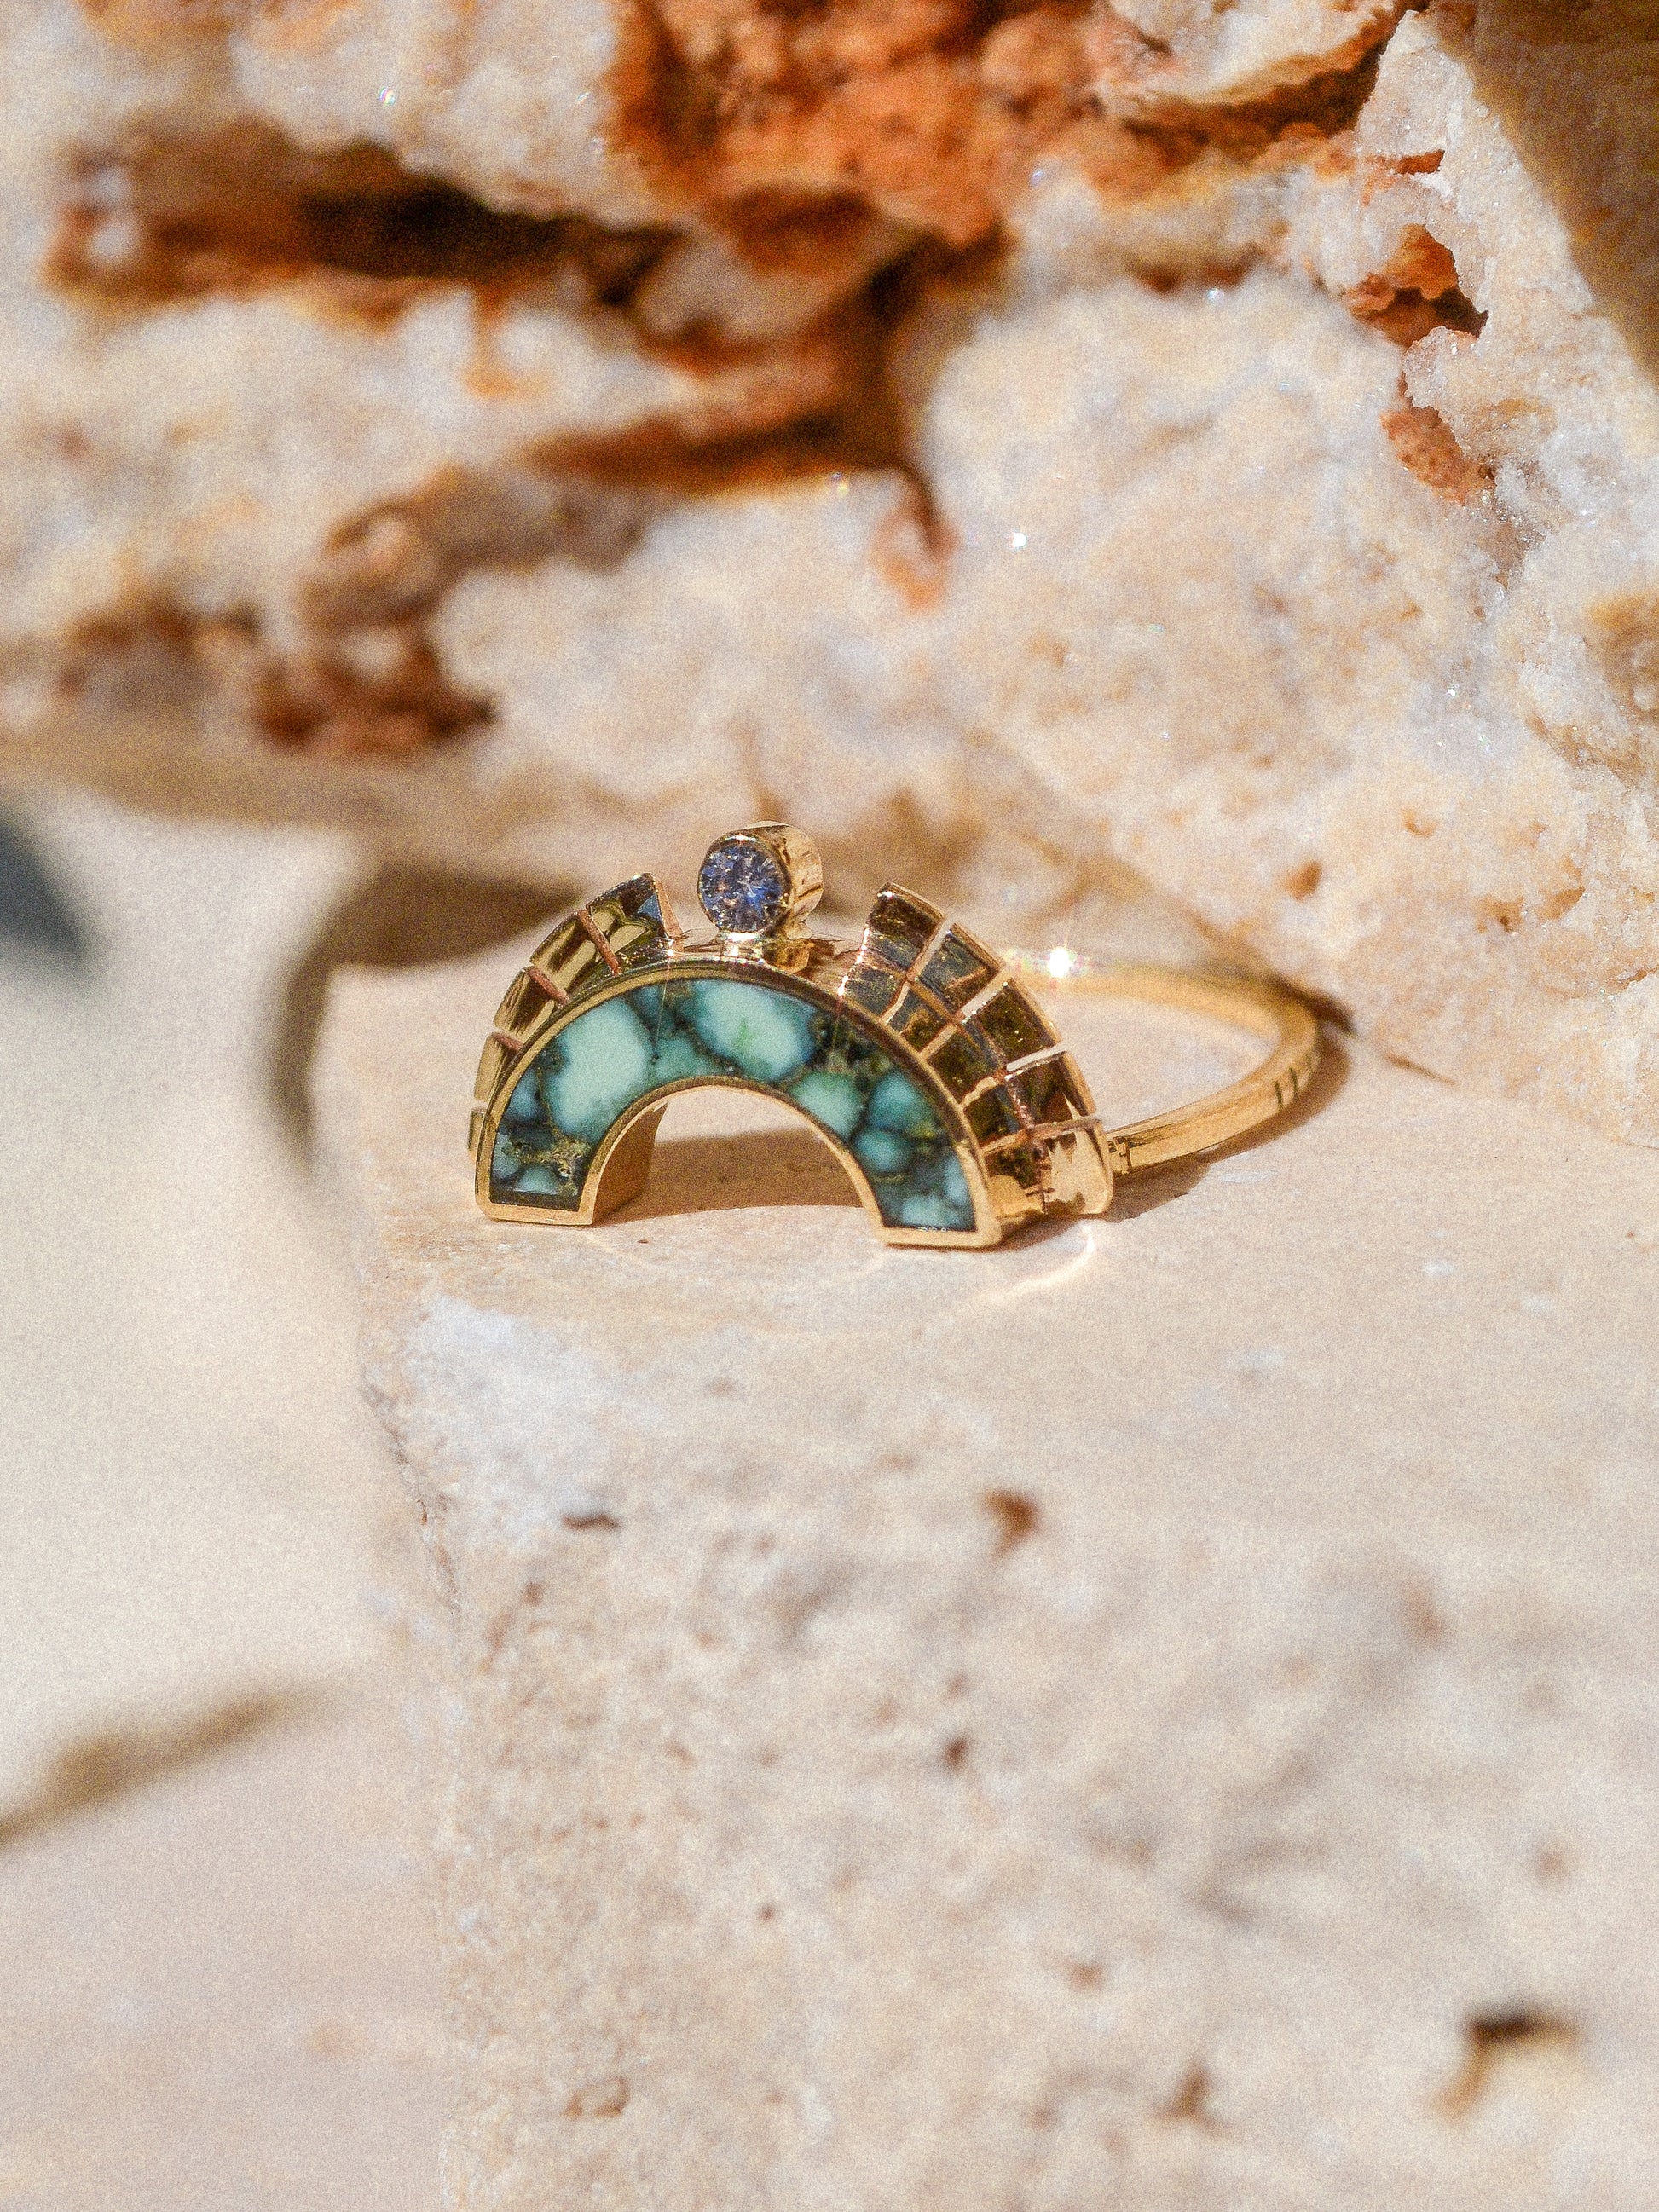 RISING SOL ARCH CROWN / The inlaid Angel Wing variscite is hand cut and shaped to fit perfectly inside this 14K gold bezel. A Young in the Mountain signature carved halo features a .03 ct conflict-free white diamond that brings beautiful light to this piece.